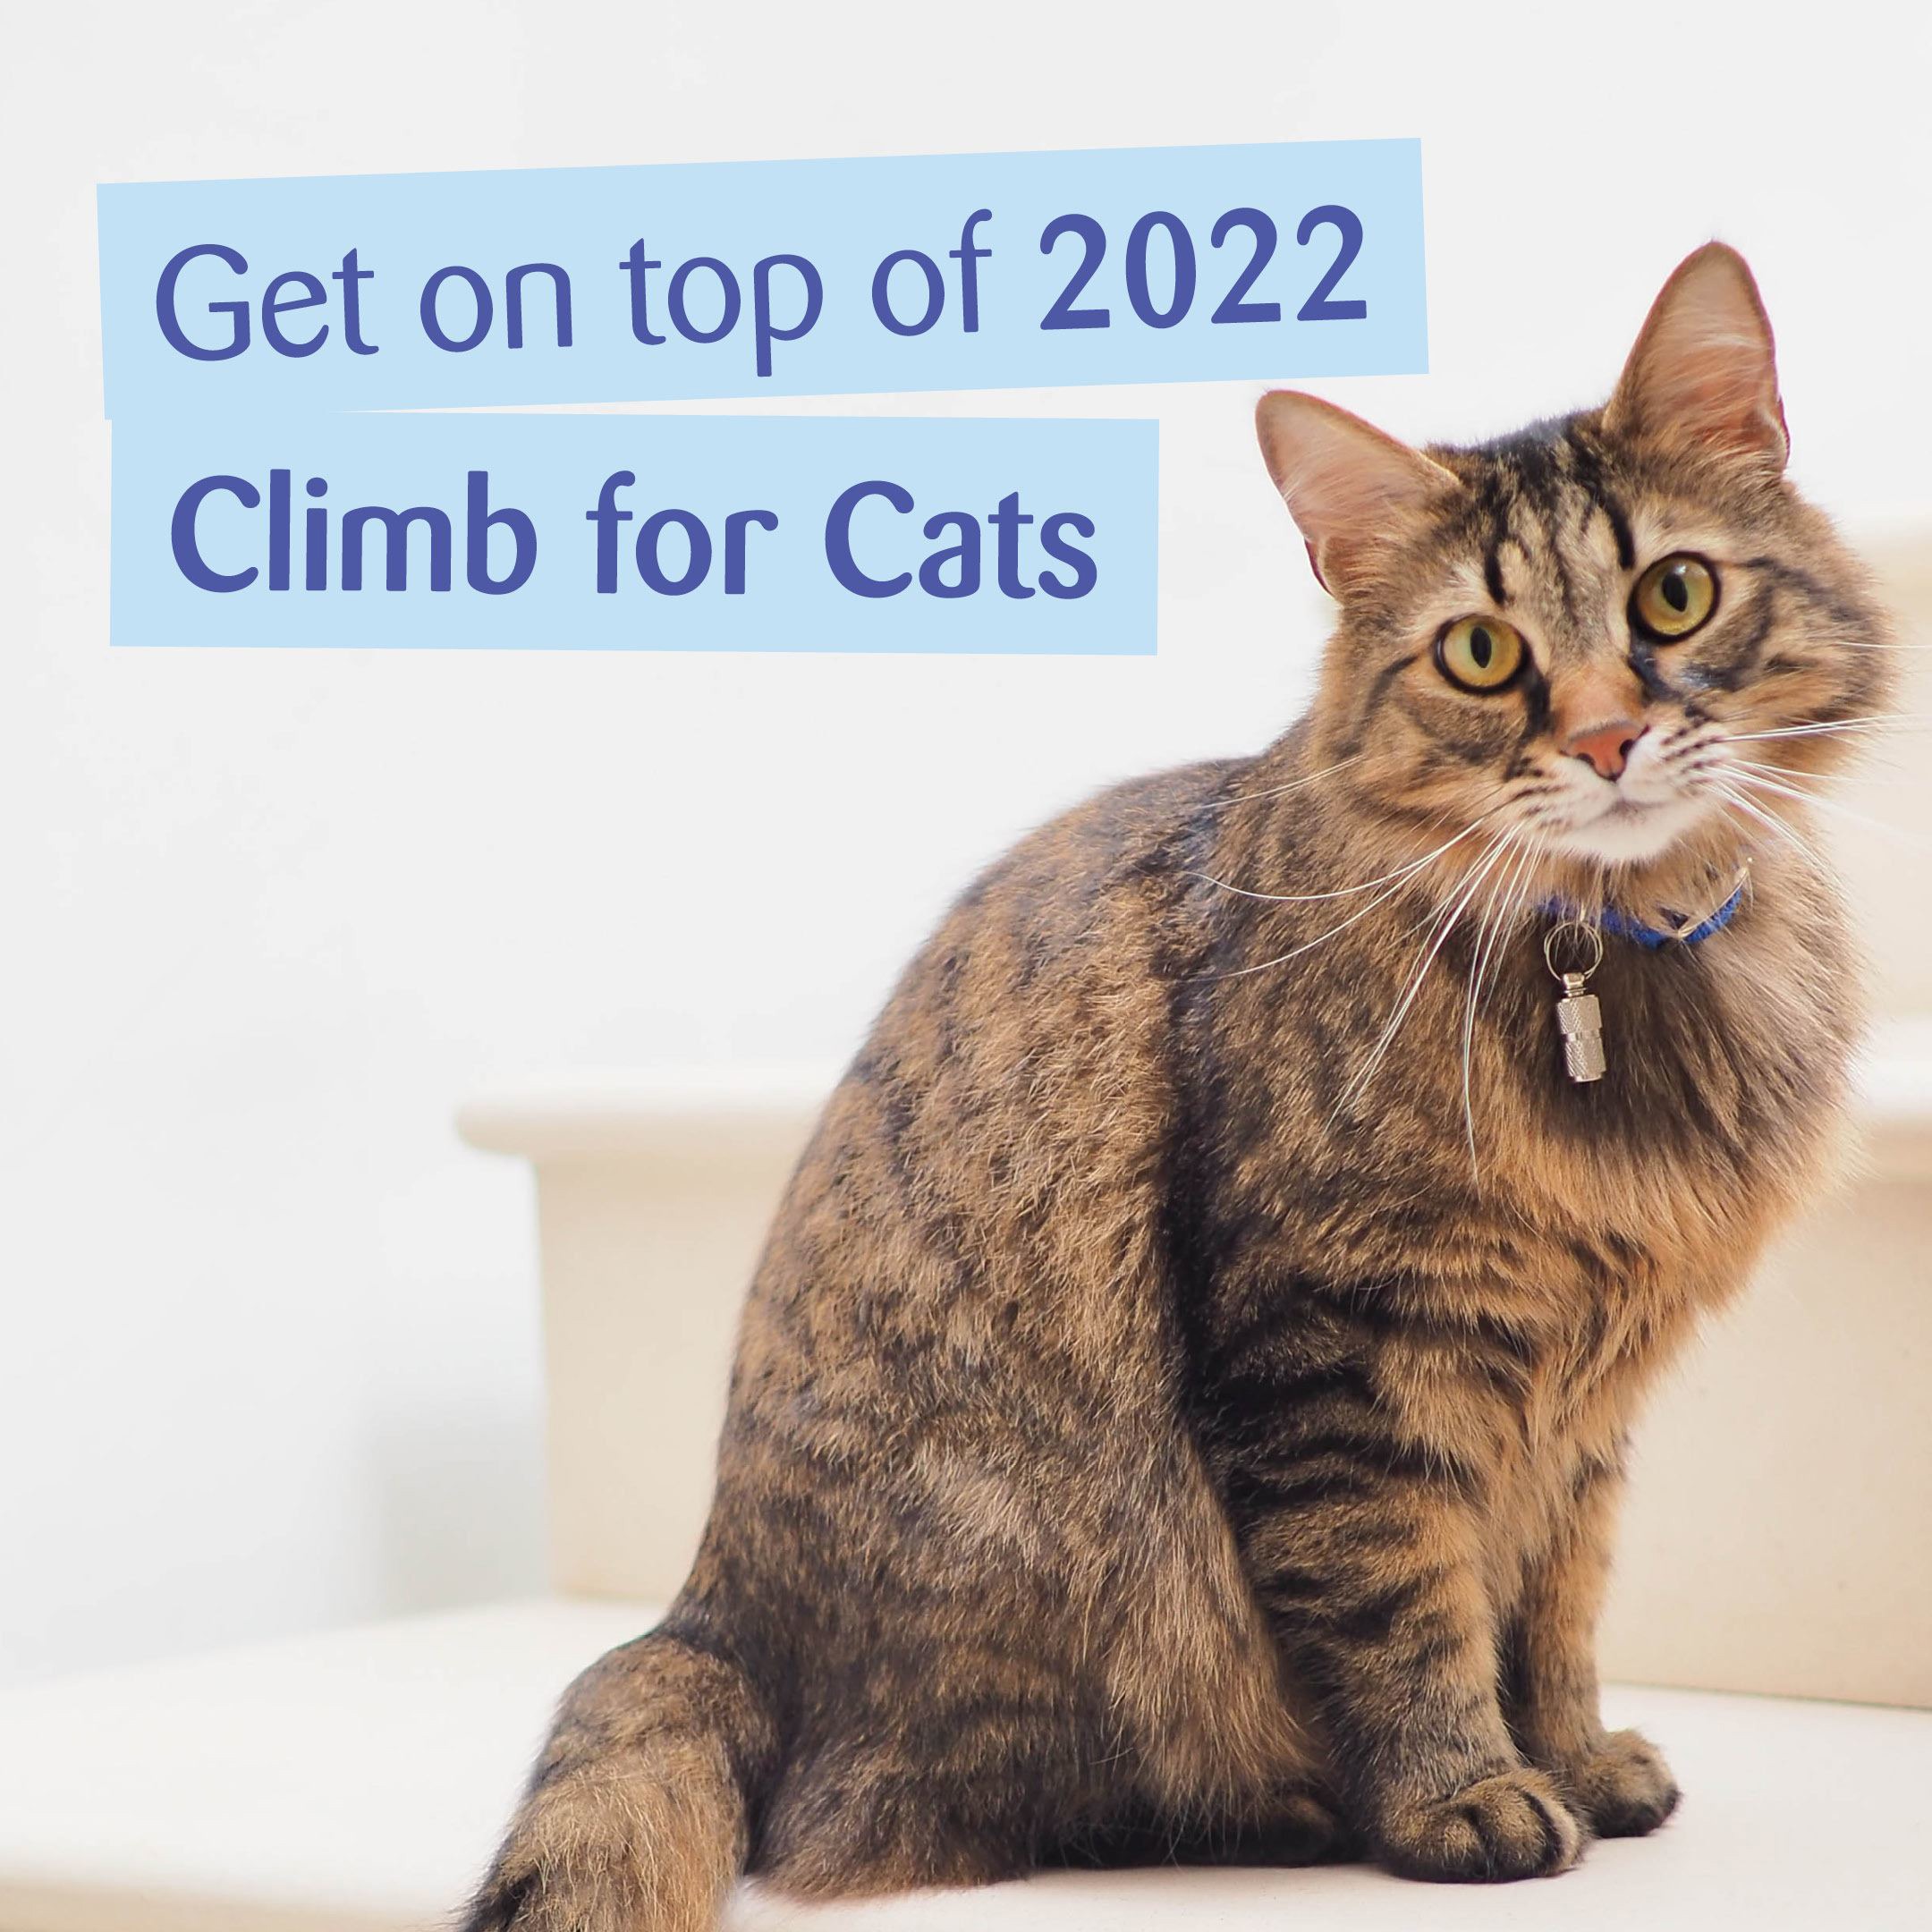 Climb for Cats challenge